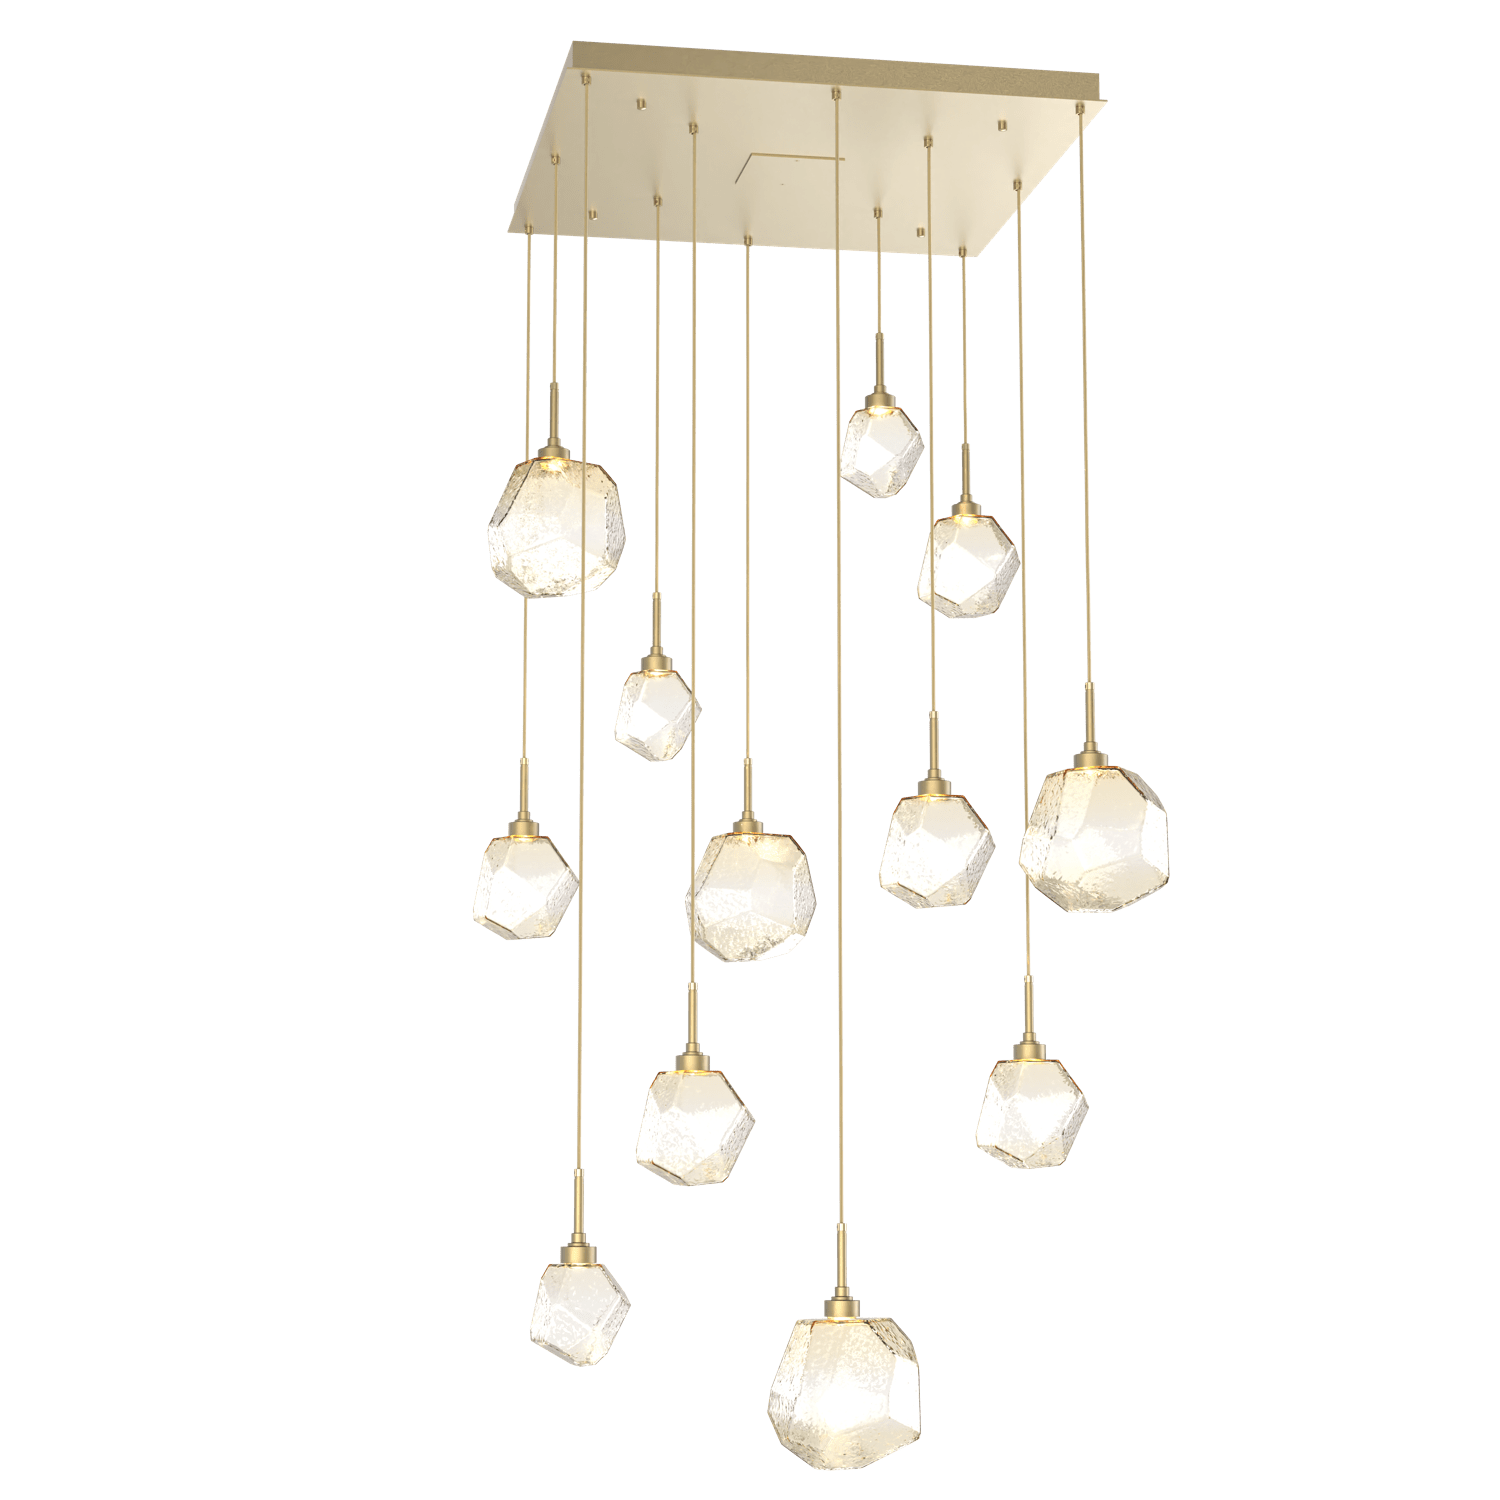 CHB0039-12-GB-A-Hammerton-Studio-Gem-12-light-square-pendant-chandelier-with-gilded-brass-finish-and-amber-blown-glass-shades-and-LED-lamping